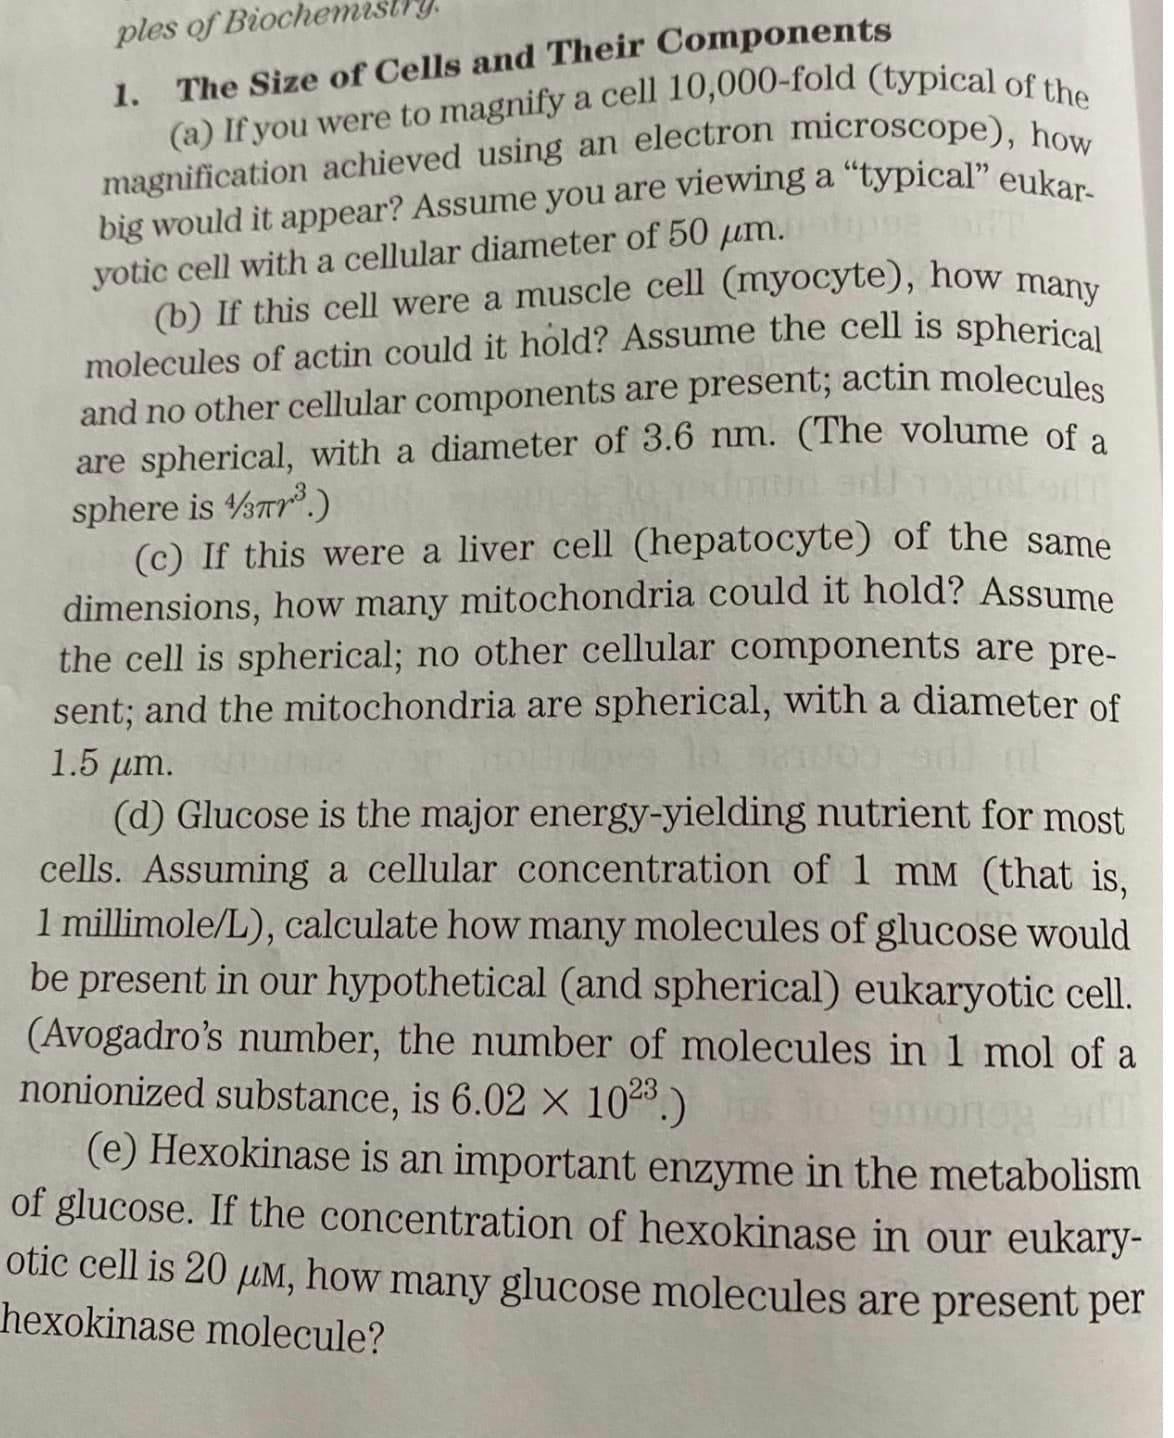 molecules of actin could it hold? Assume the cell is spherical
The Size of Cells and Their Components
(a) If you were to magnify a cell 10,000-fold (typica] of u
magnification achieved using an electron microscope), ho
ples of Bioch
1.
yotic cell with a cellular diameter of 50 µm.
(b) If this cell were a muscle cell (myocyte),
how
many
and no other cellular components are present; actin molecules
are spherical, with a diameter of 3.6 nm. (The volume of a
sphere is %ar.)
(c) If this were a liver cell (hepatocyte) of the same
dimensions, how many mitochondria could it hold? Assume
the cell is spherical; no other cellular components are pre-
sent; and the mitochondria are spherical, with a diameter of
1.5 µm. h
(d) Glucose is the major energy-yielding nutrient for most
cells. Assuming a cellular concentration of 1 mM (that is,
1 millimole/L), calculate how many molecules of glucose would
be present in our hypothetical (and spherical) eukaryotic cell.
(Avogadro's number, the number of molecules in 1 mol of a
nonionized substance, is 6.02 X 10.)
(e) Hexokinase is an important enzyme in the metabolism
of glucose. If the concentration of hexokinase in our eukary-
otic cell is 20 uM, how many glucose molecules are present per
hexokinase molecule?
